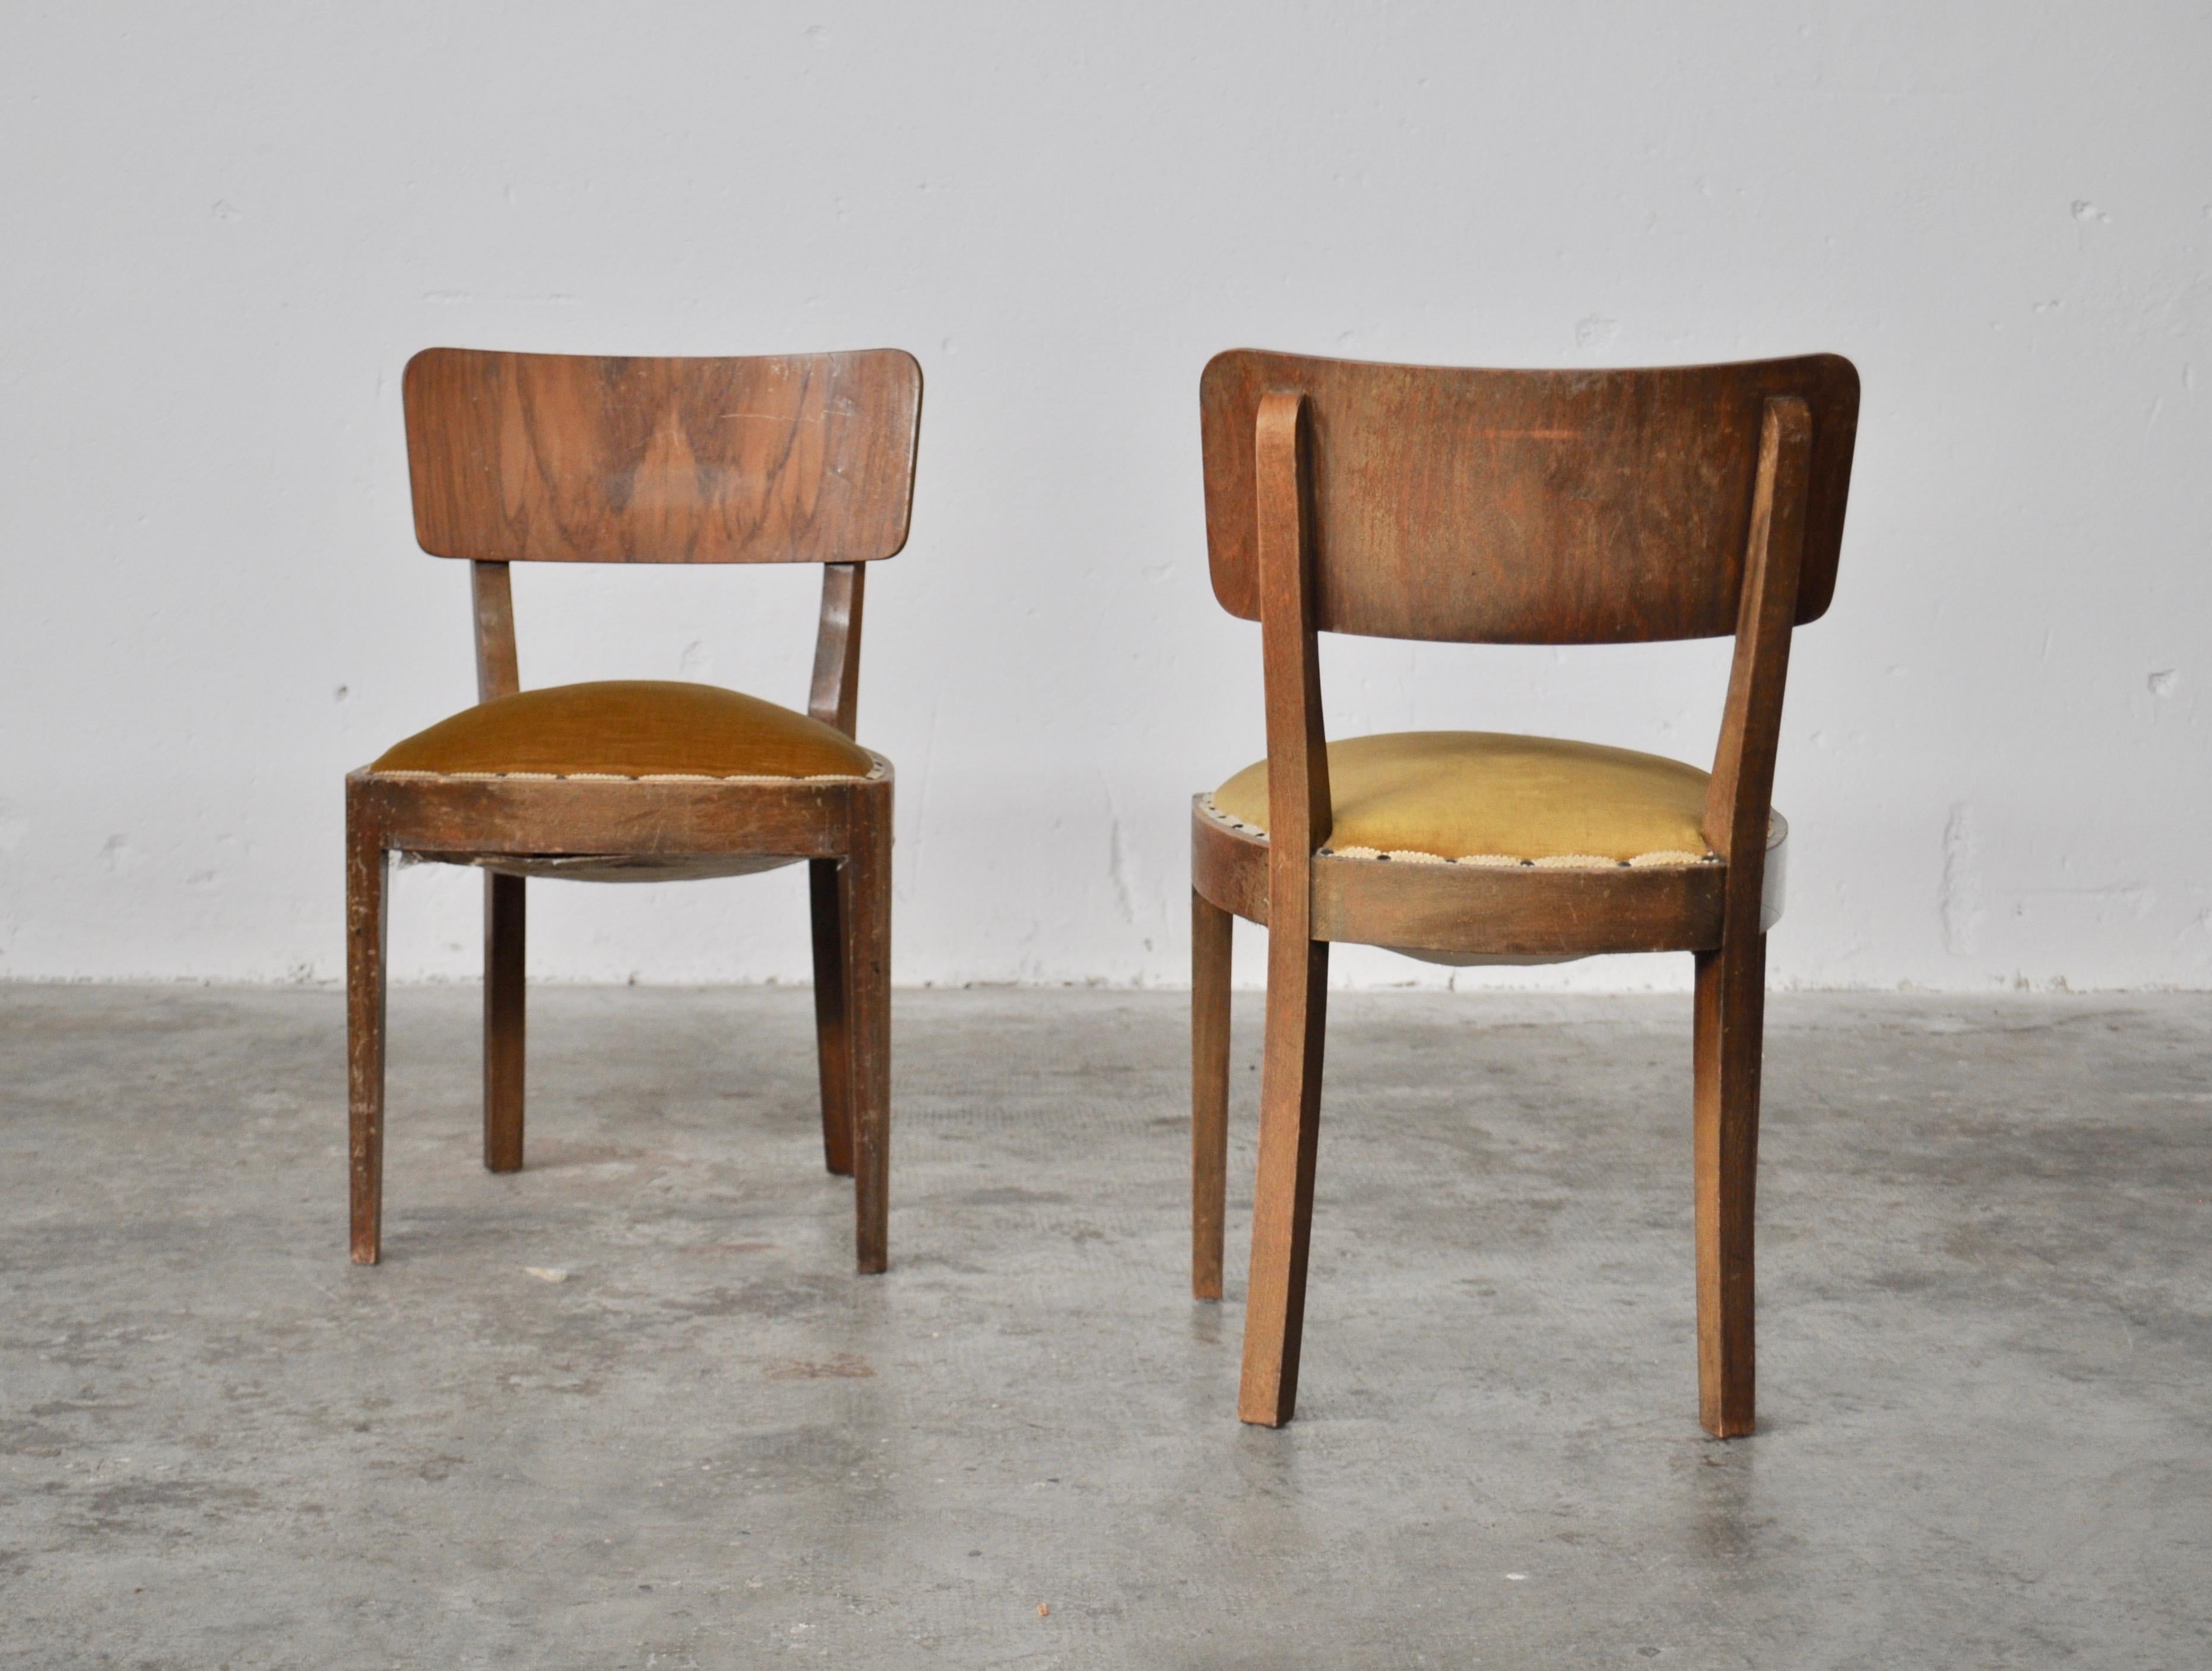 Italian Vintage Walnut Chairs with Studs & Straps and Springs in Velvet, Italy, 1920s, S For Sale